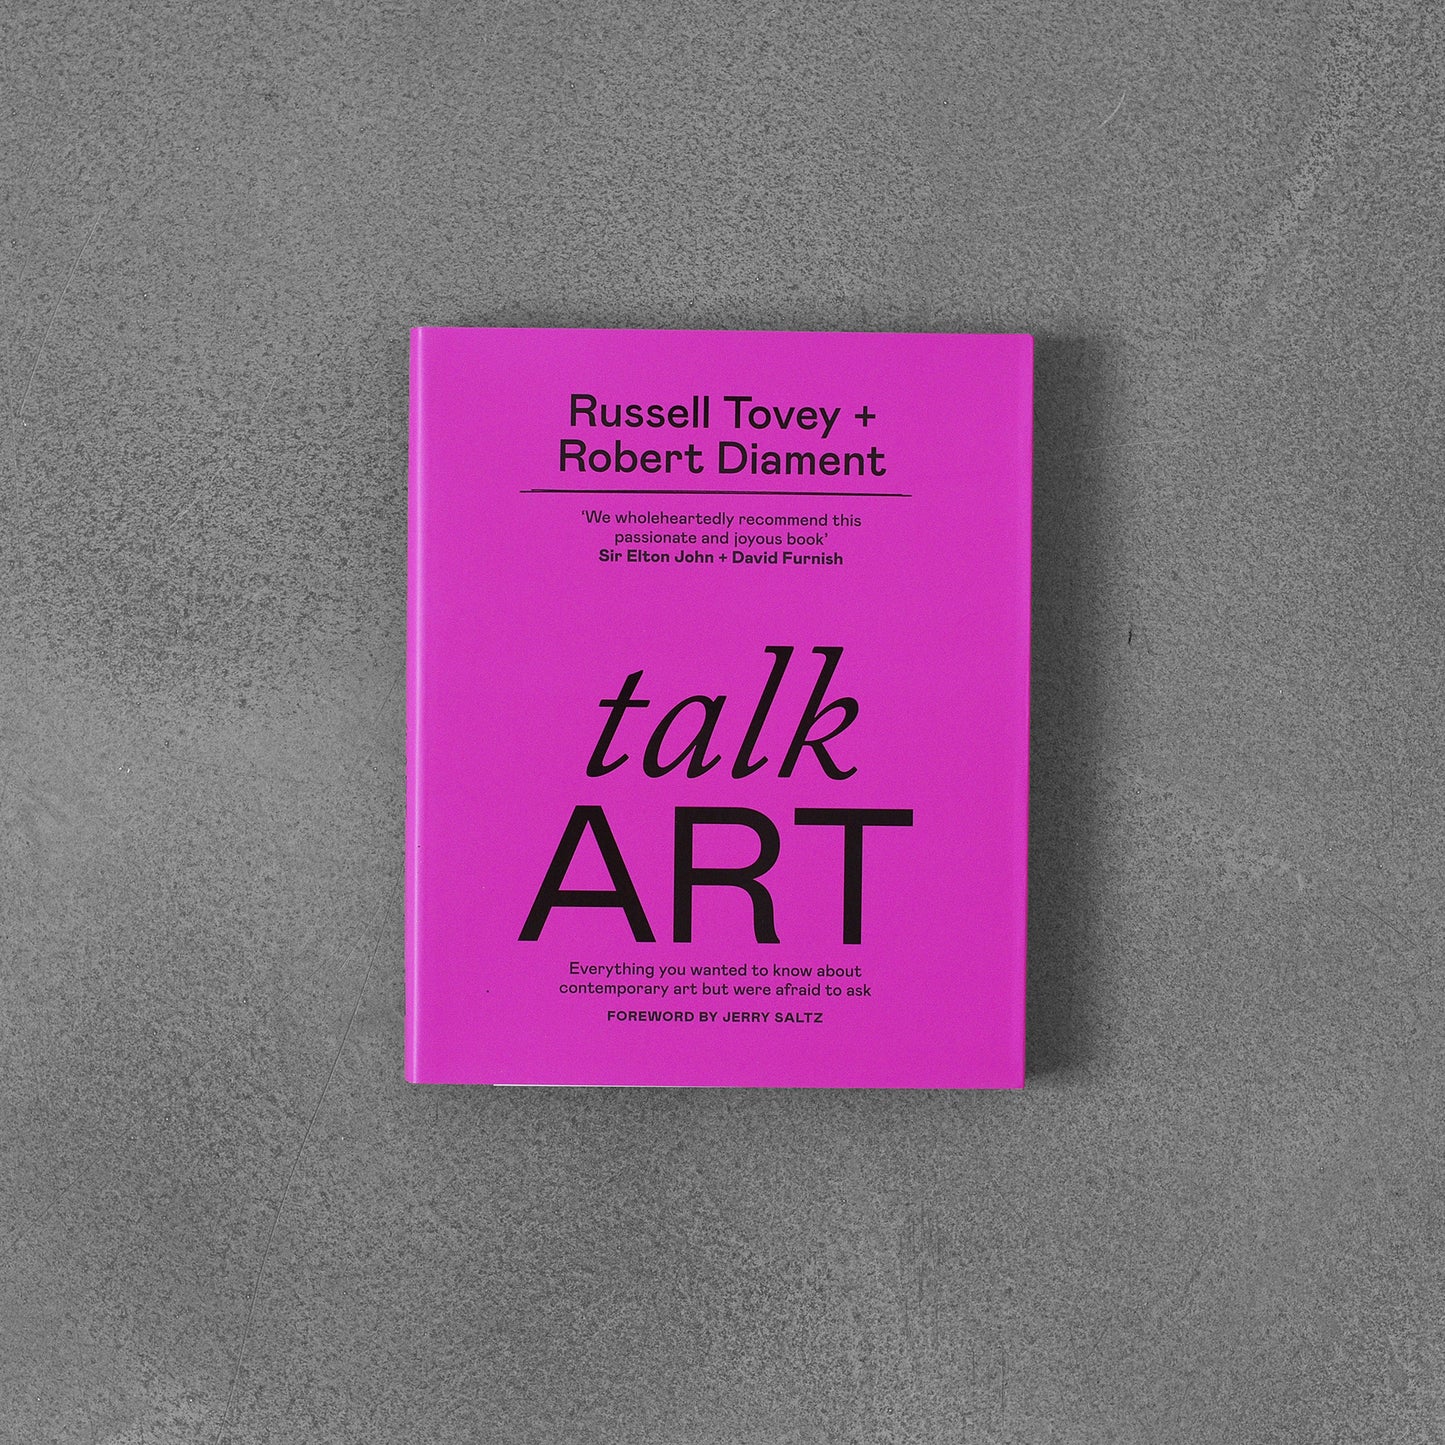 Talk Art, Everything you wanted to know about contemporary art but were afraid to ask